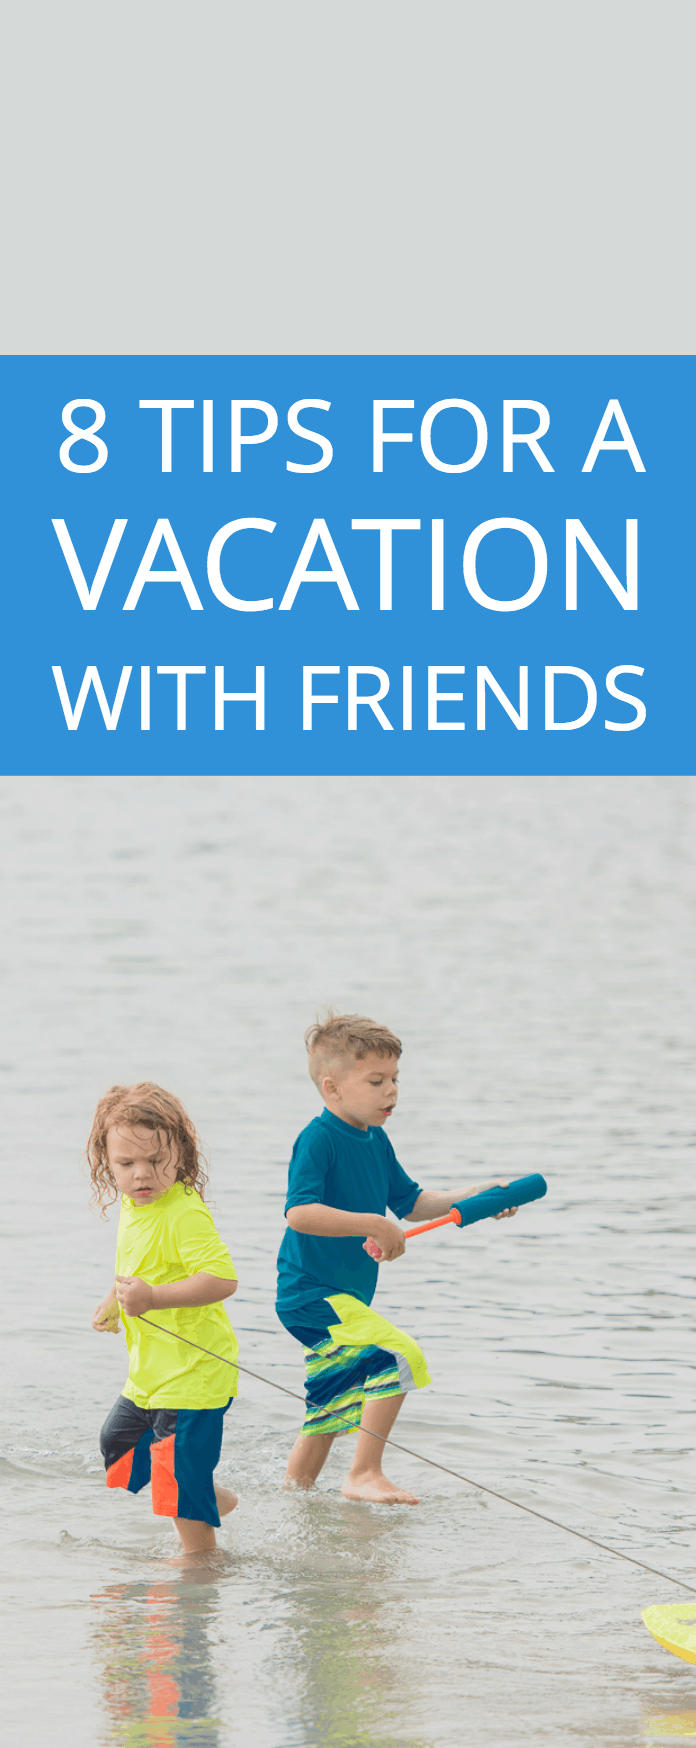 8 tips for a vacation with friends